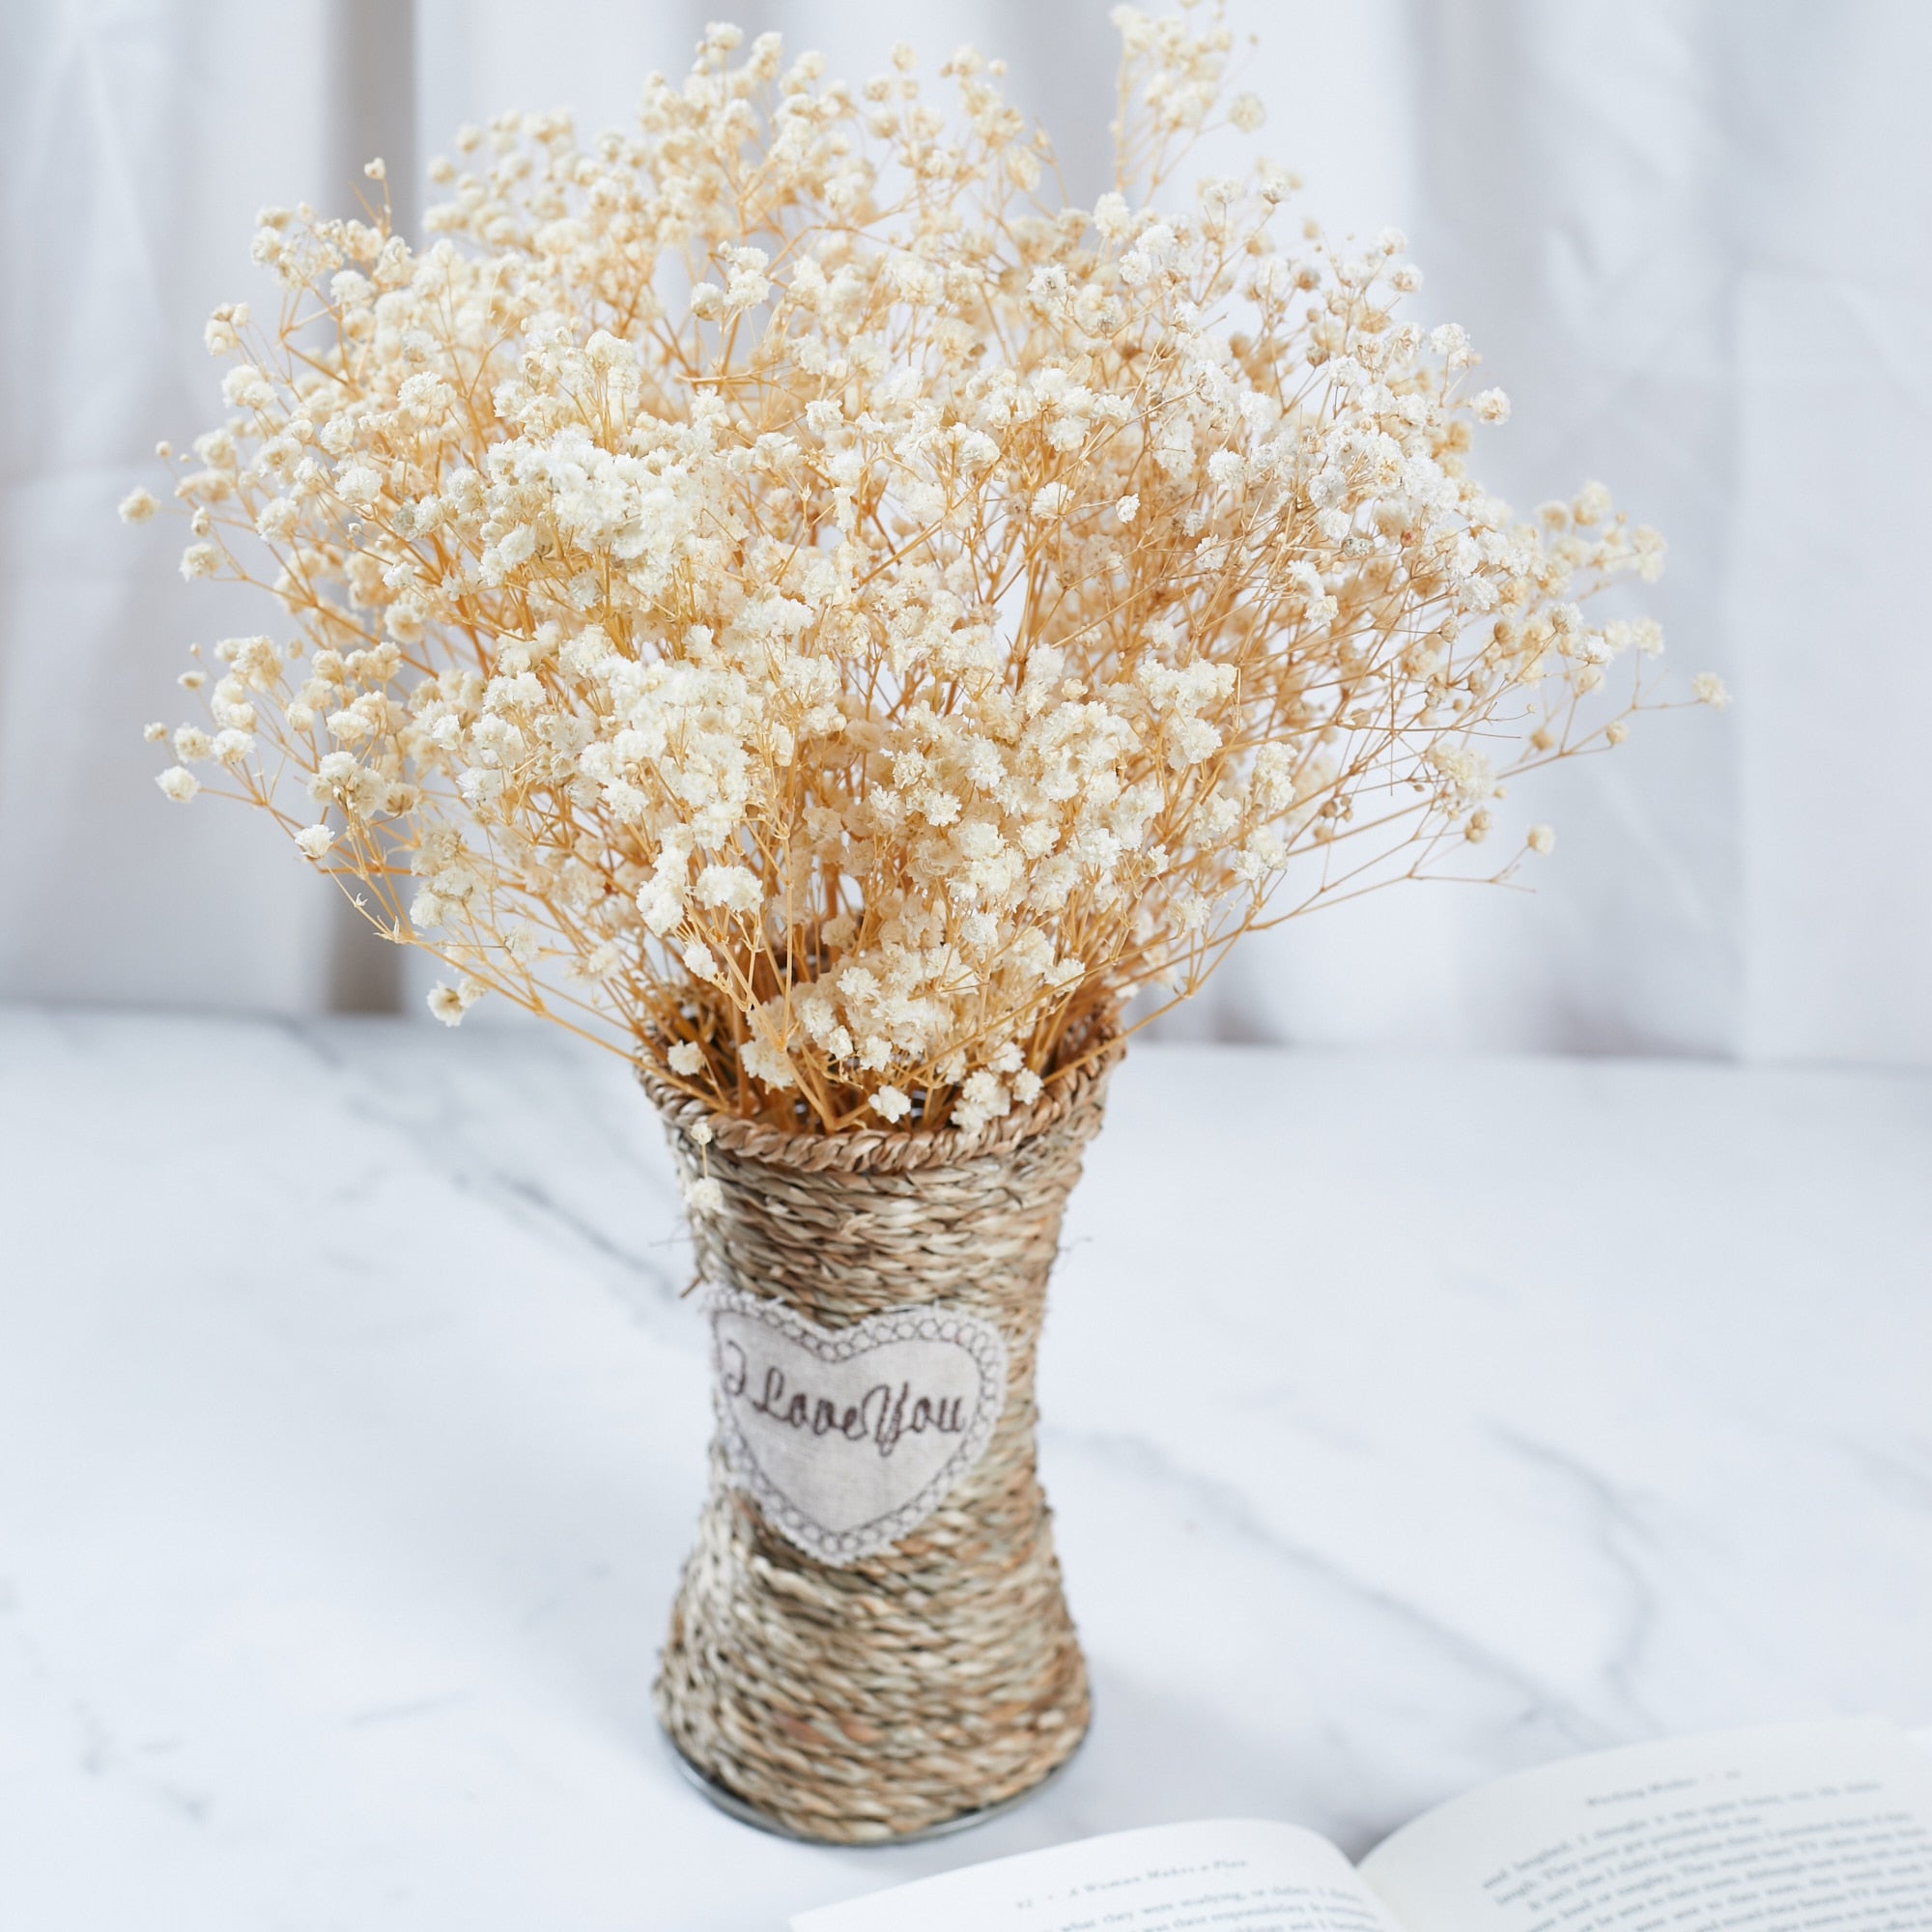 Dried Baby Breath Flowers Bouquets Colorful White Gypsophile Natural Dry Flower Gypsophila Wedding Decoration Nordic Home Decor